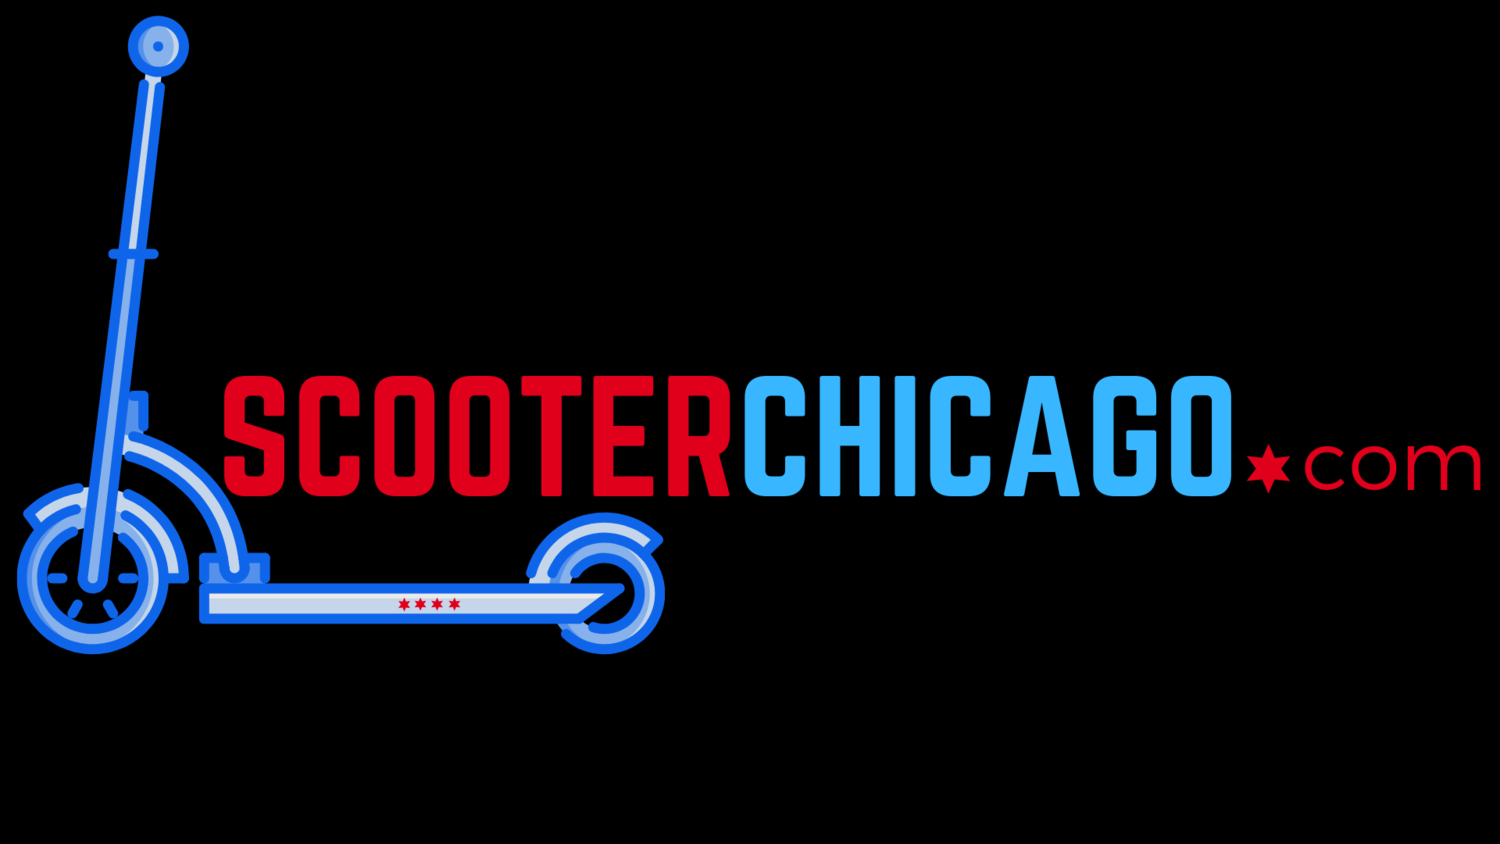 Scooter Chicago